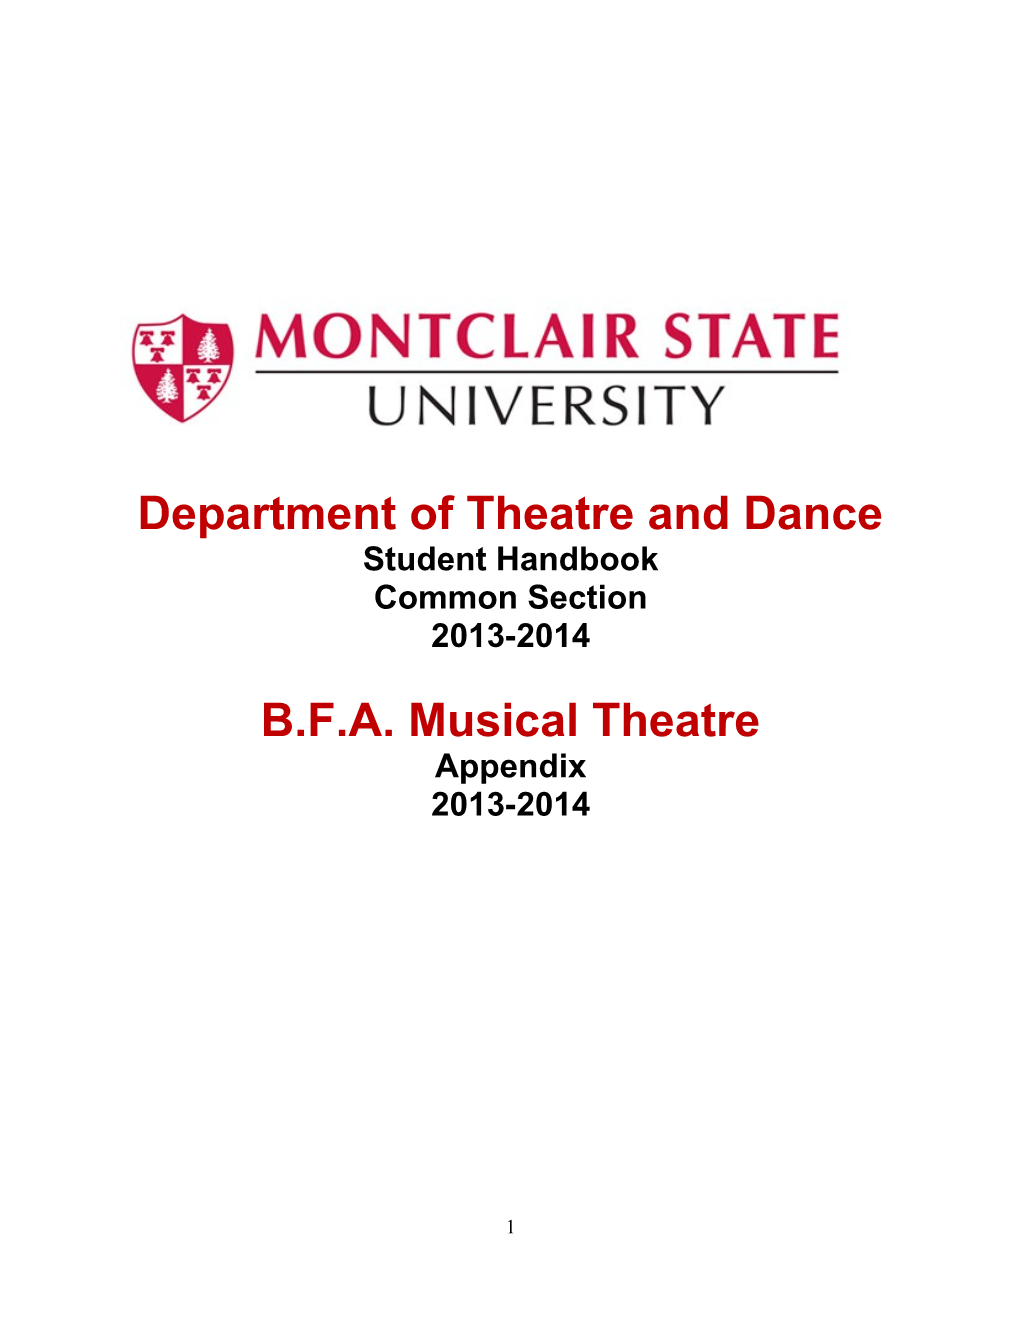 Department of Theatre and Dance